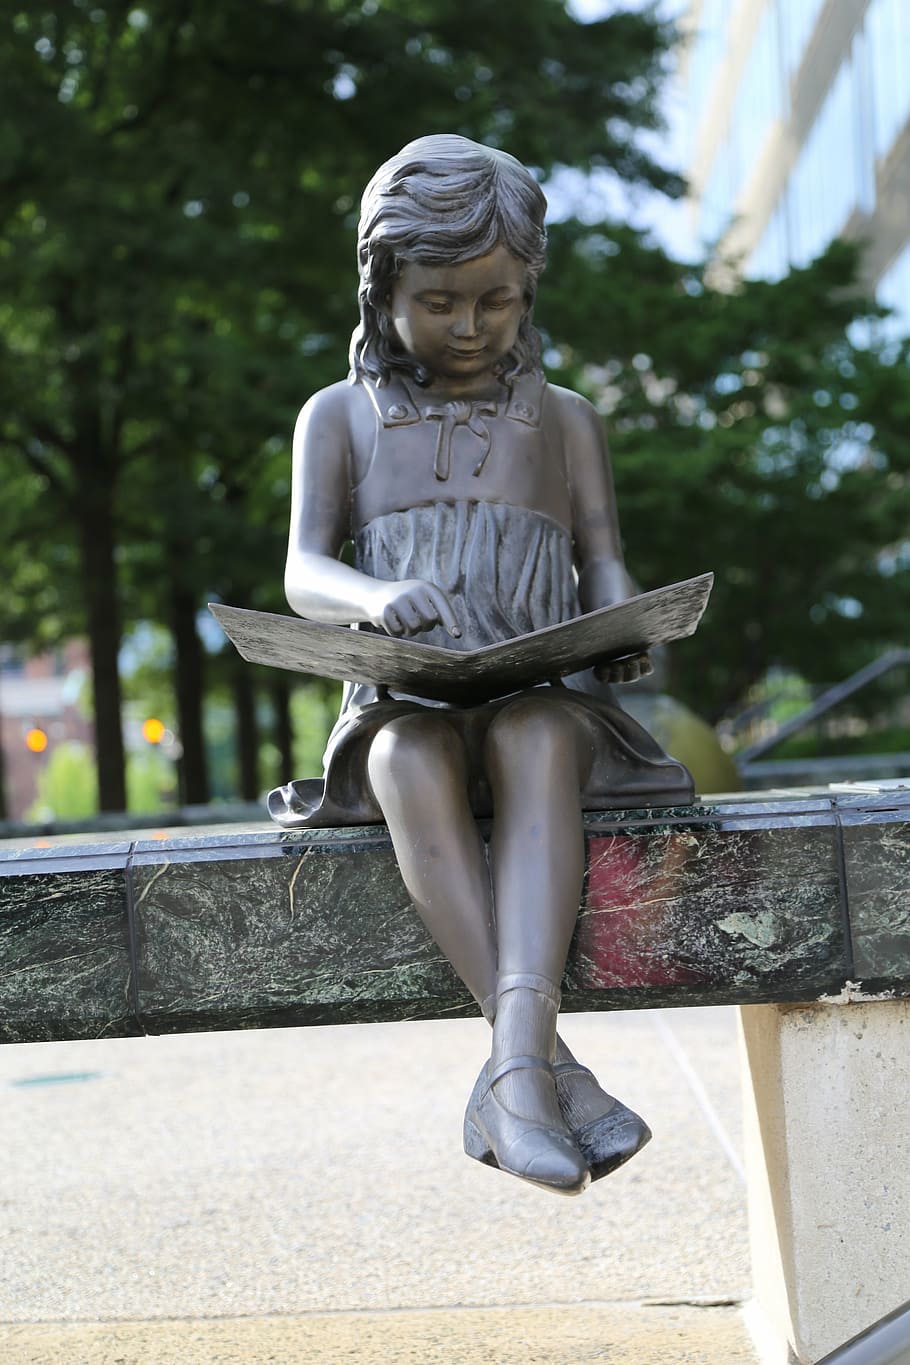 girl reading book statue, girl, reading, statue, education, studying, young, learning, female, kid